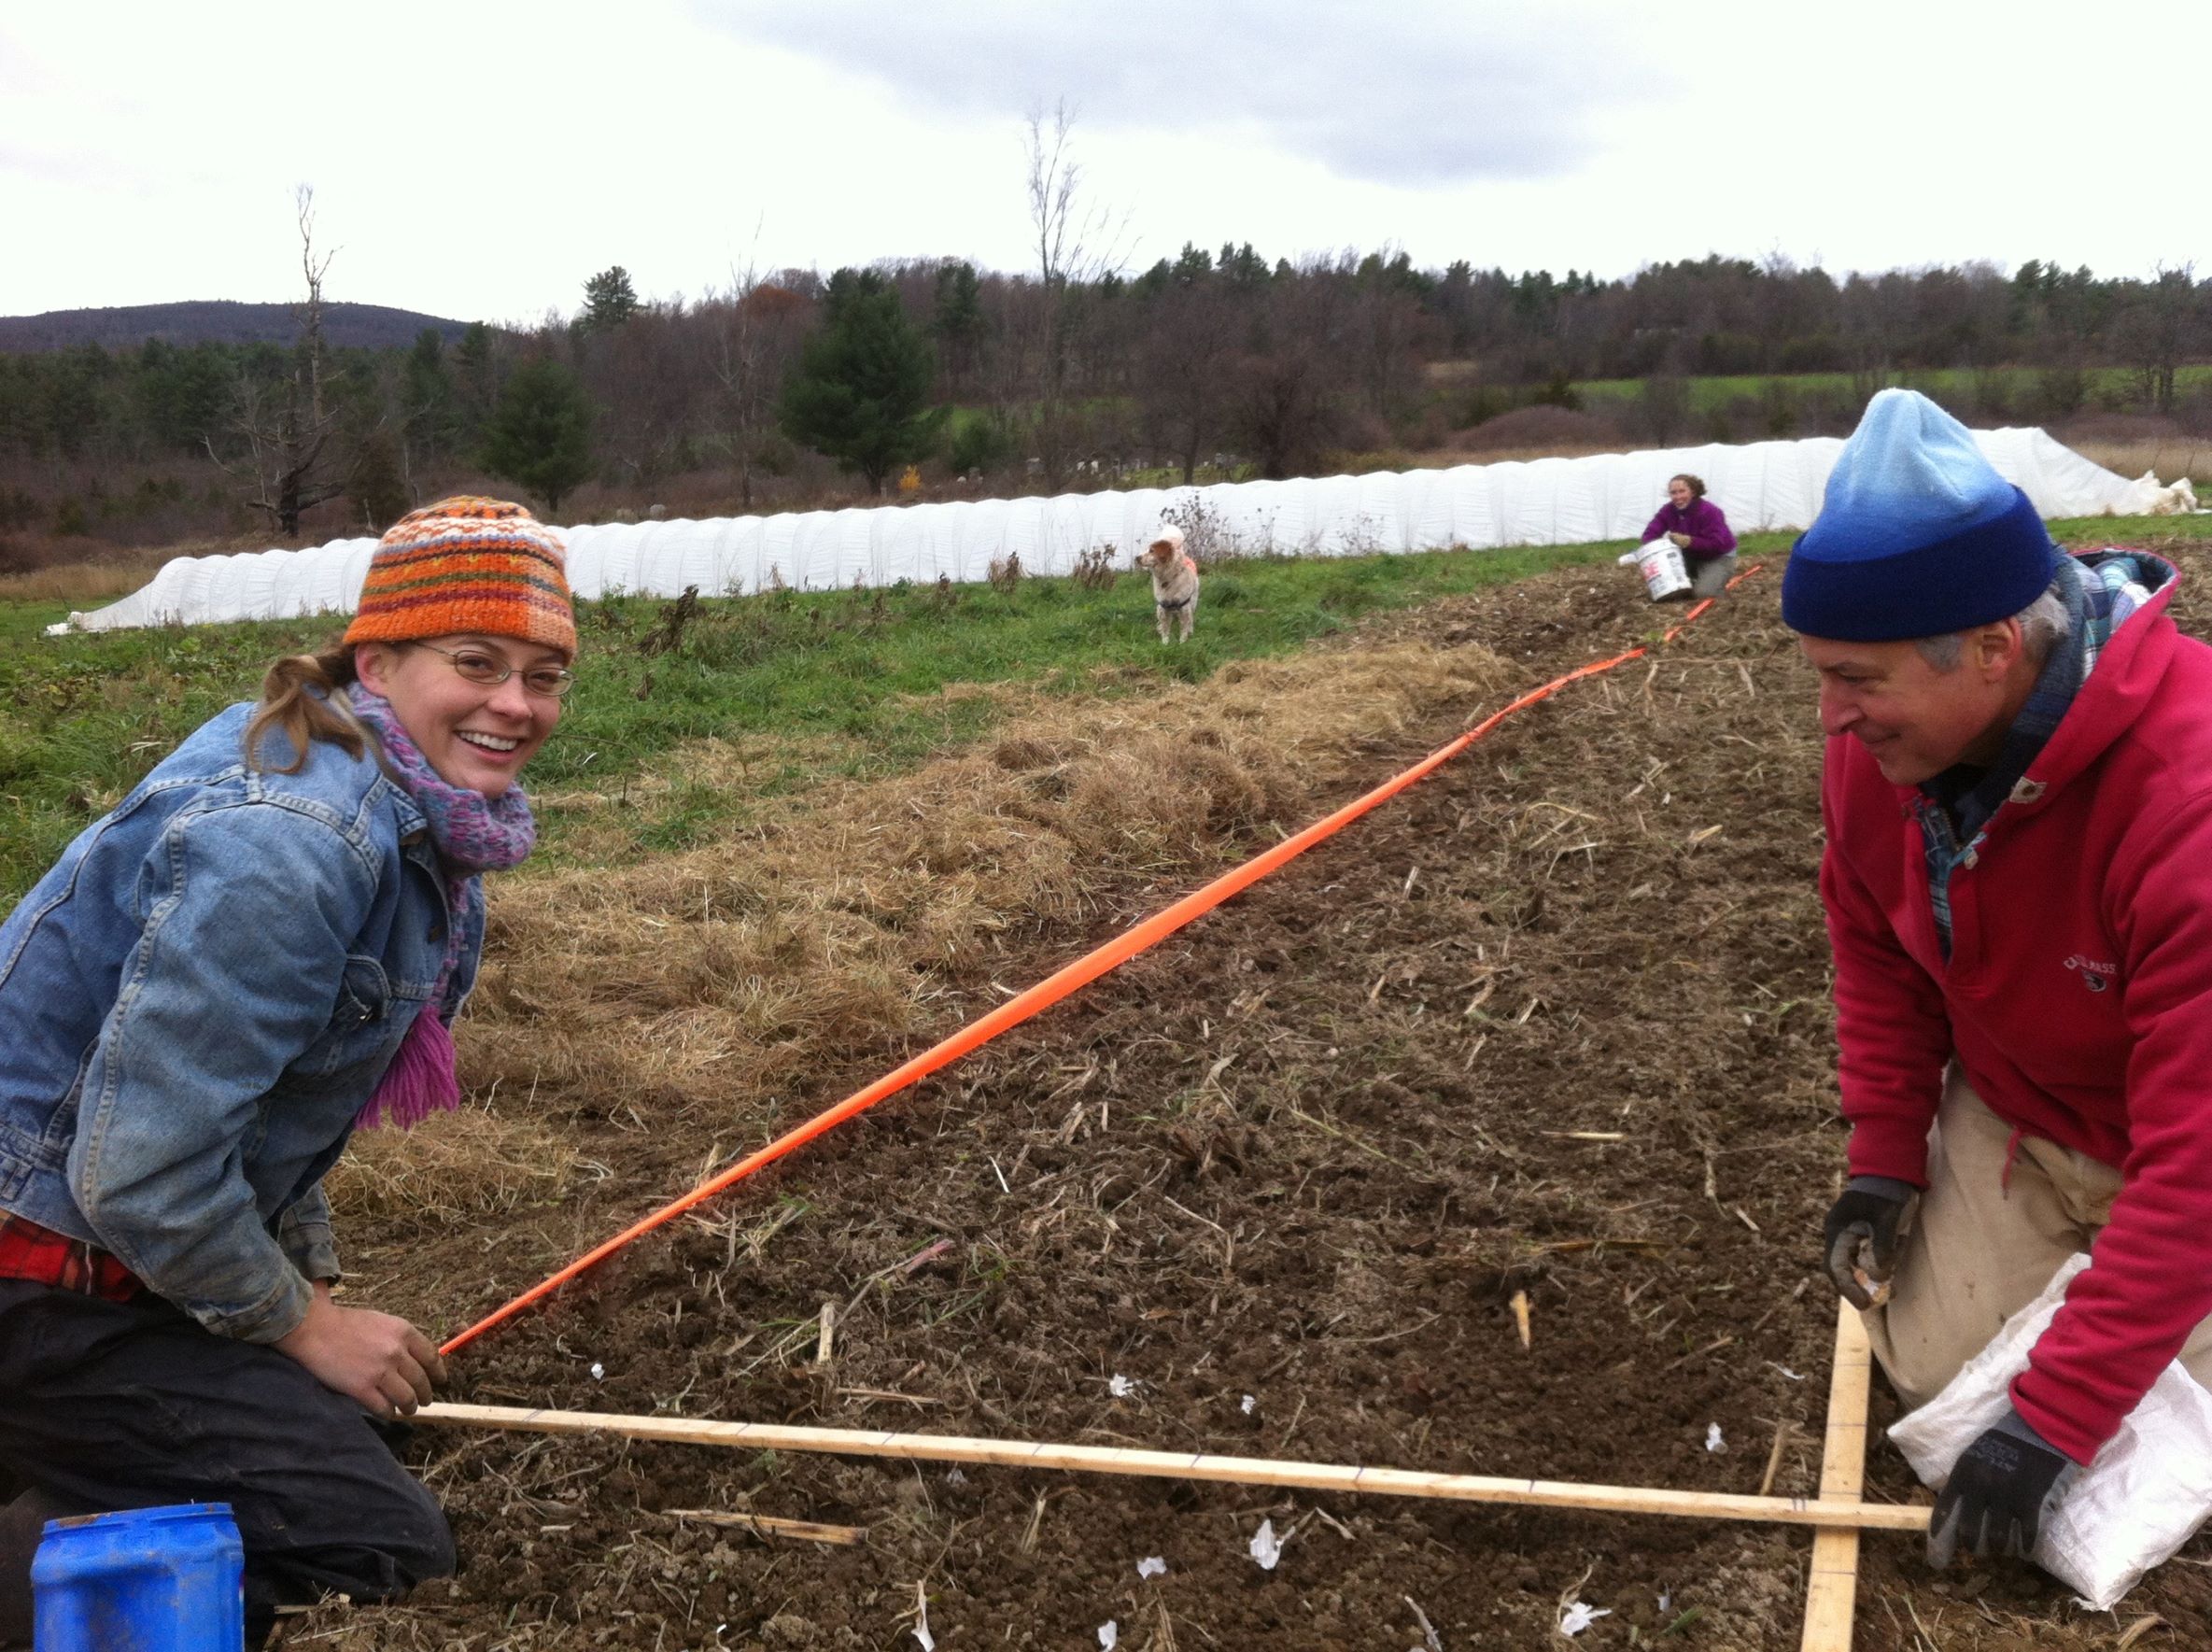 A student smiles at the camera as she helps mark a plot in a farm field. Another person is also setting lines for the plot in the foreground. Another person, an high tunnel, and a forest is in the background.